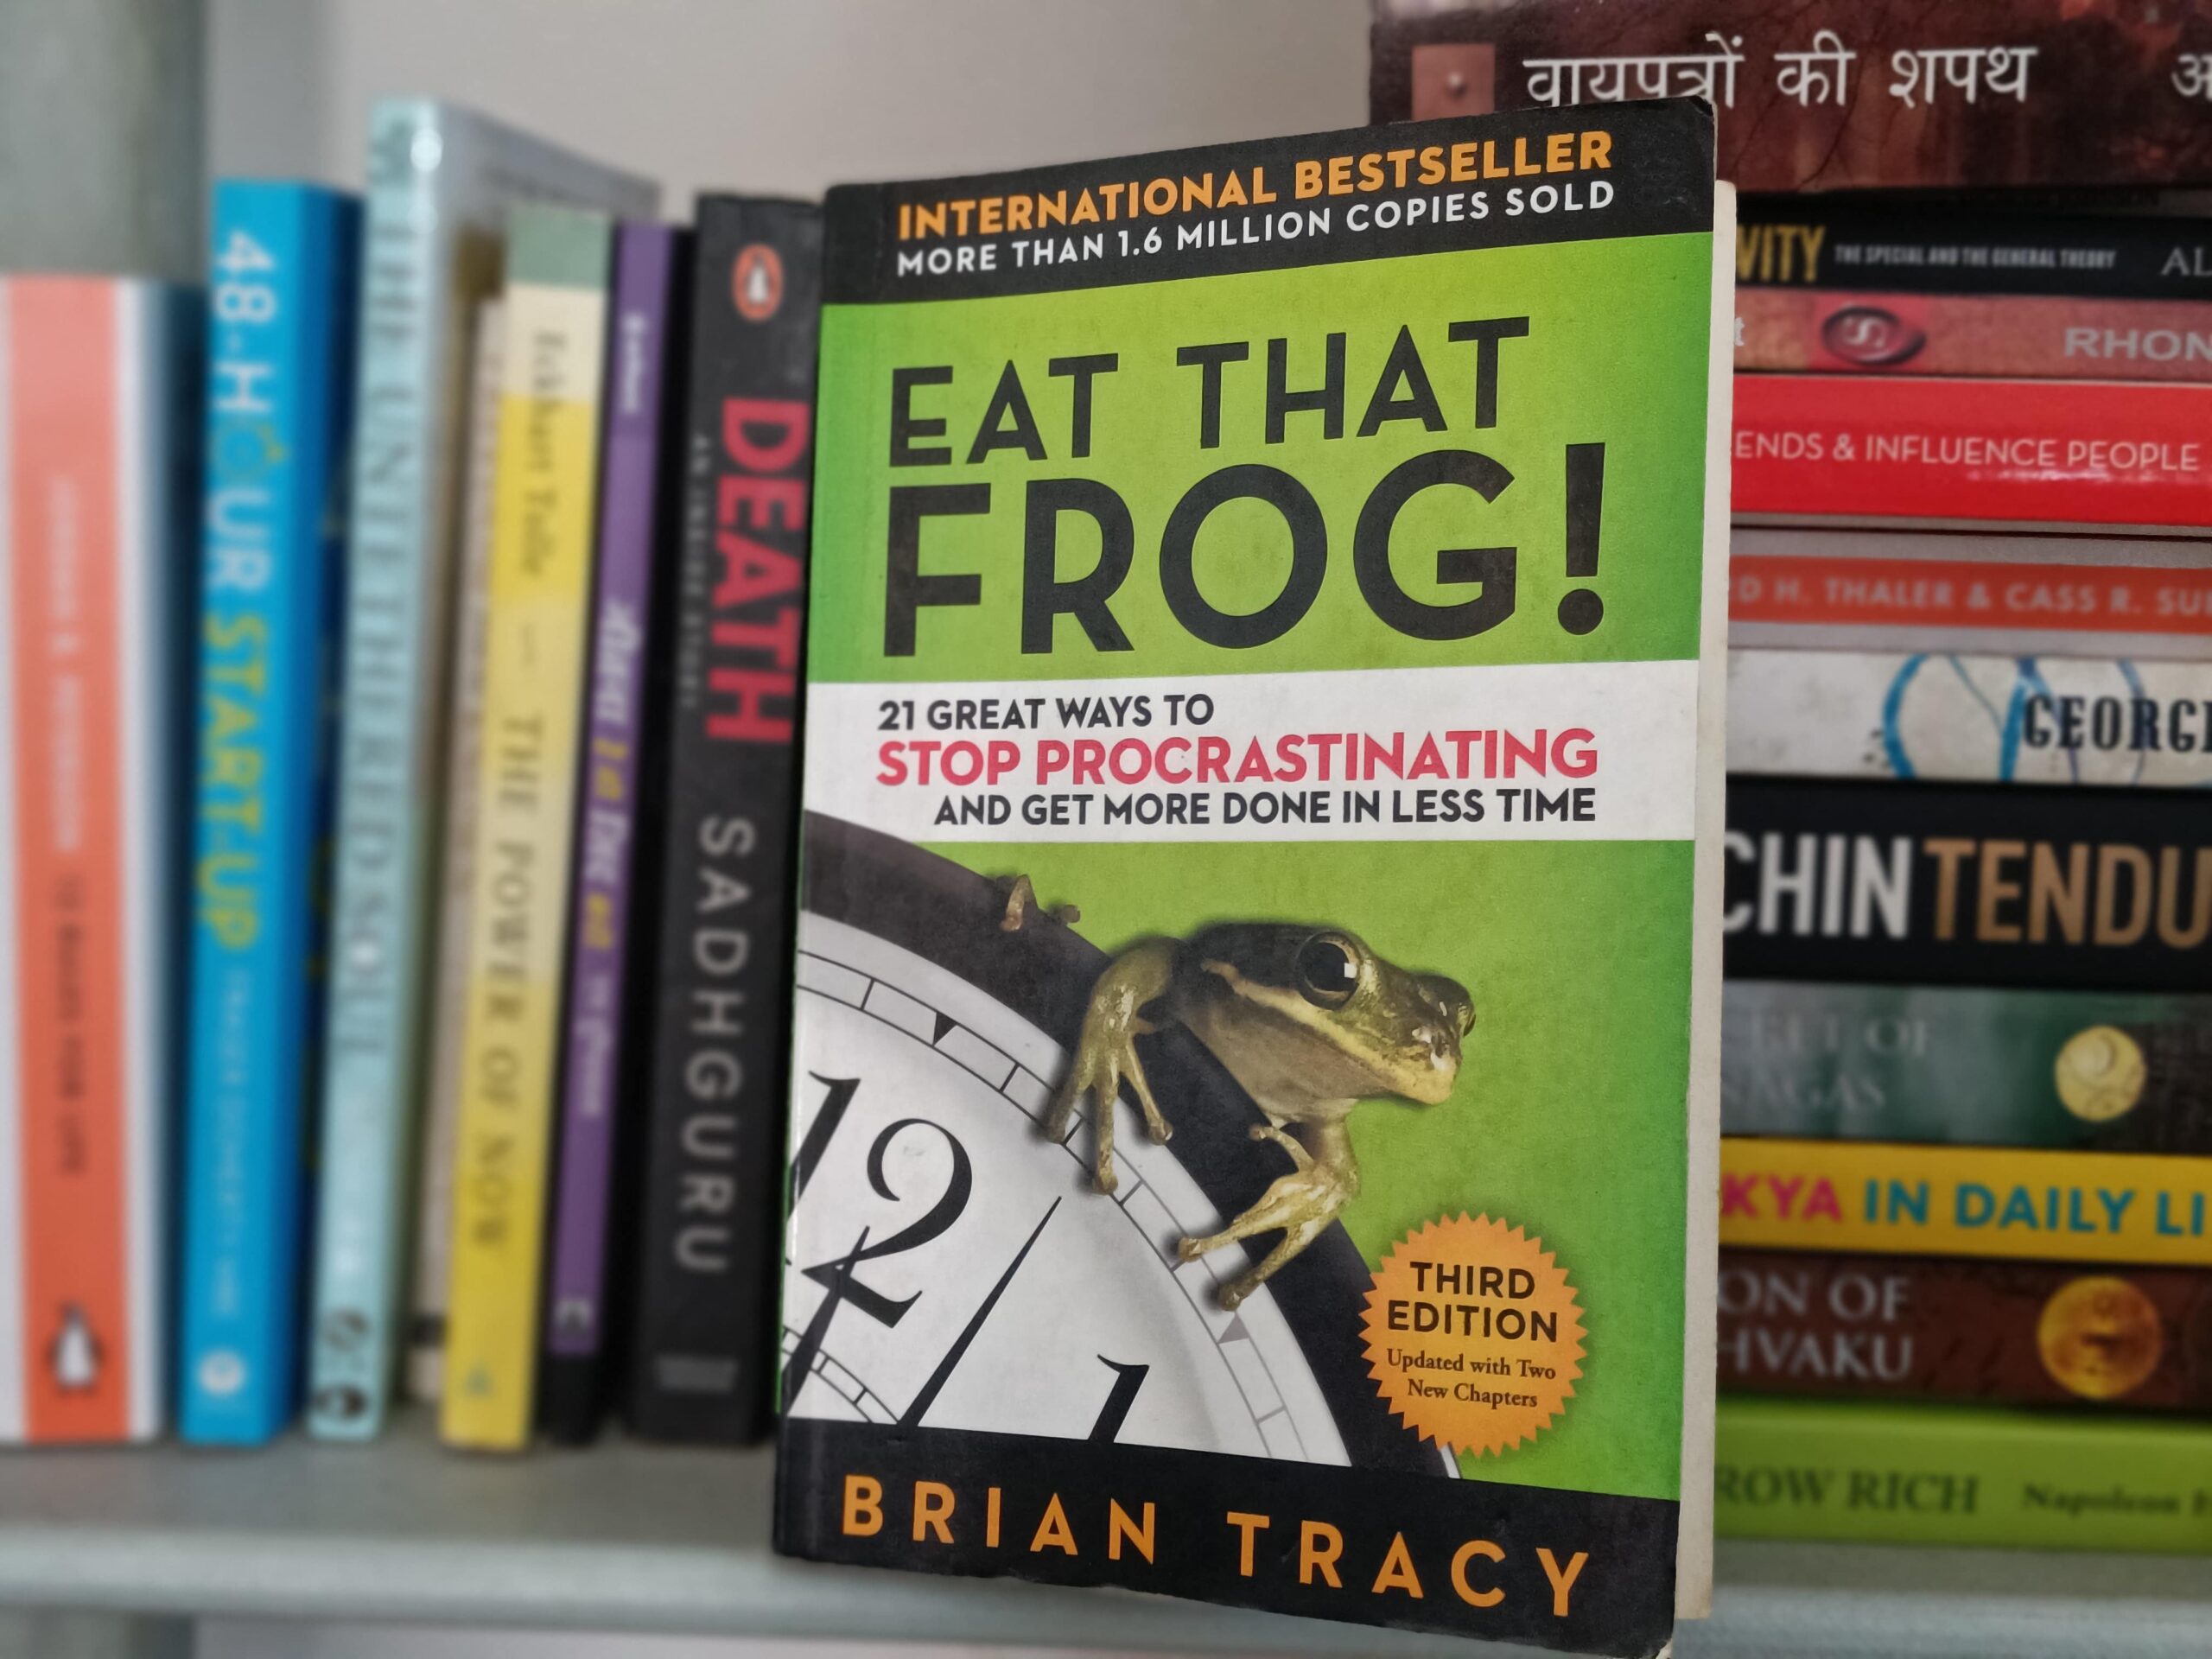 book review on eat that frog